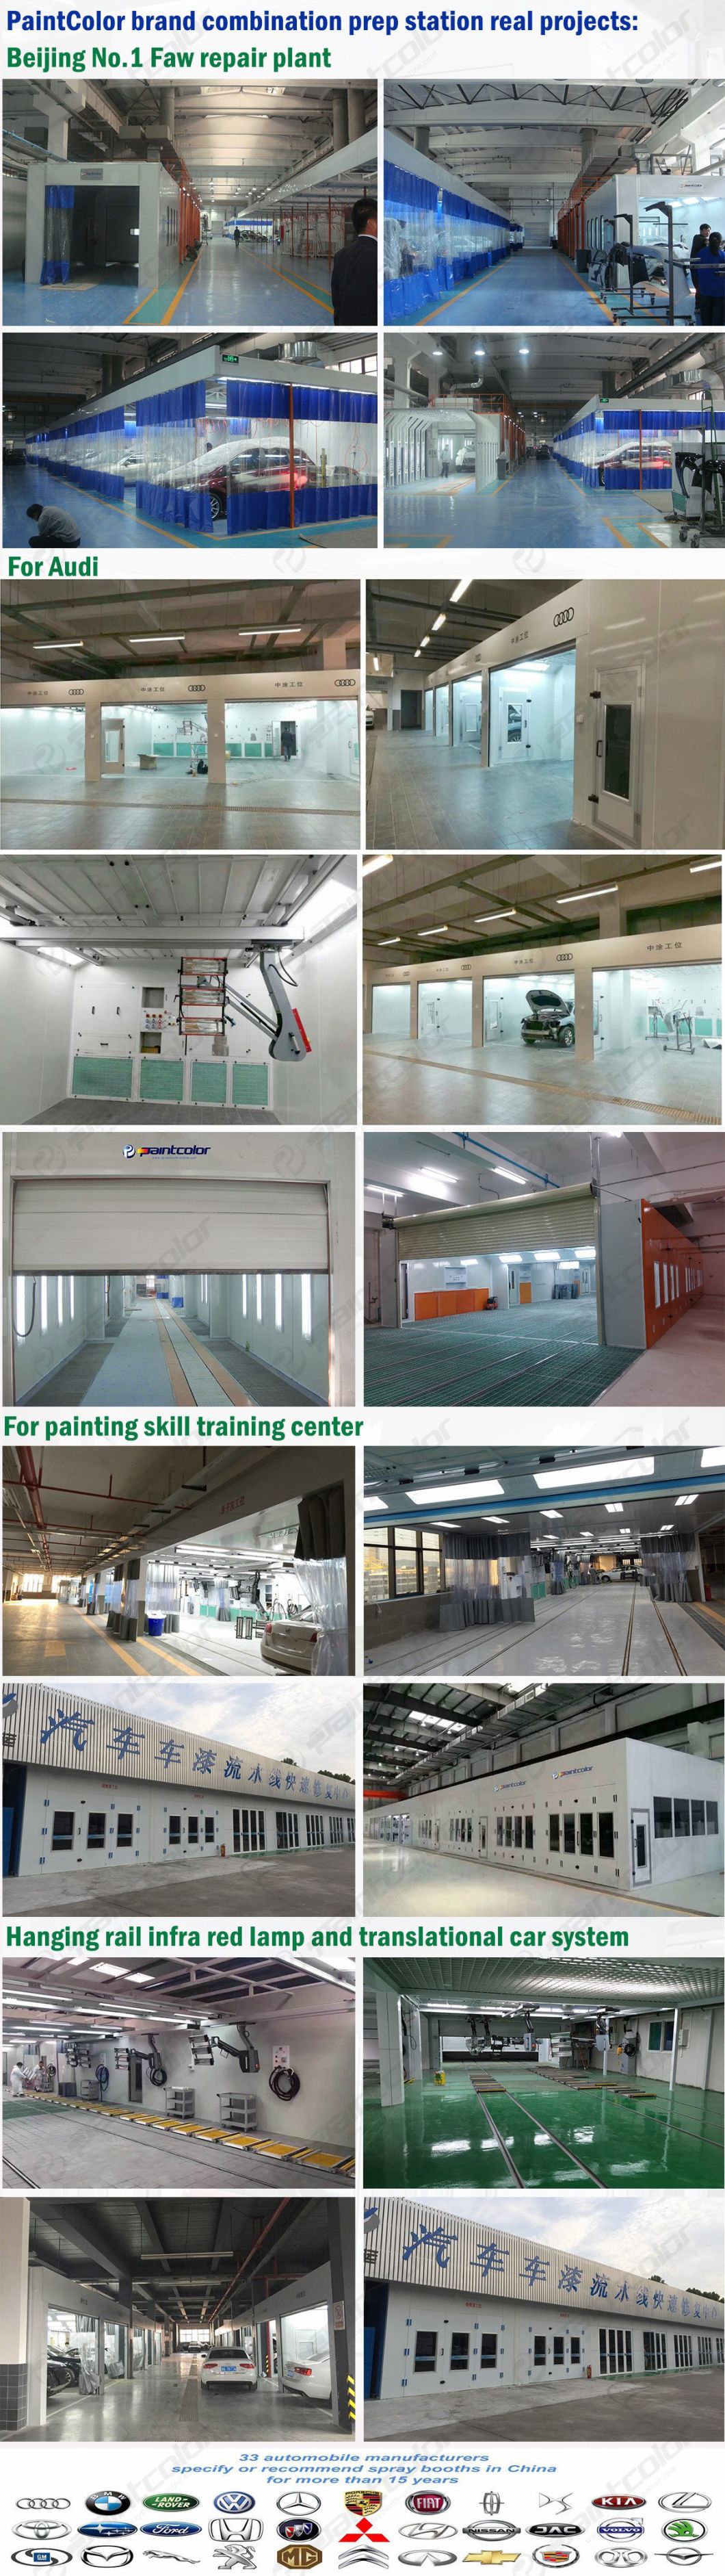 Sheet Metal Paint Line Multi-Booth Car Spray Paint Booth Production Line Paintcolor Brand